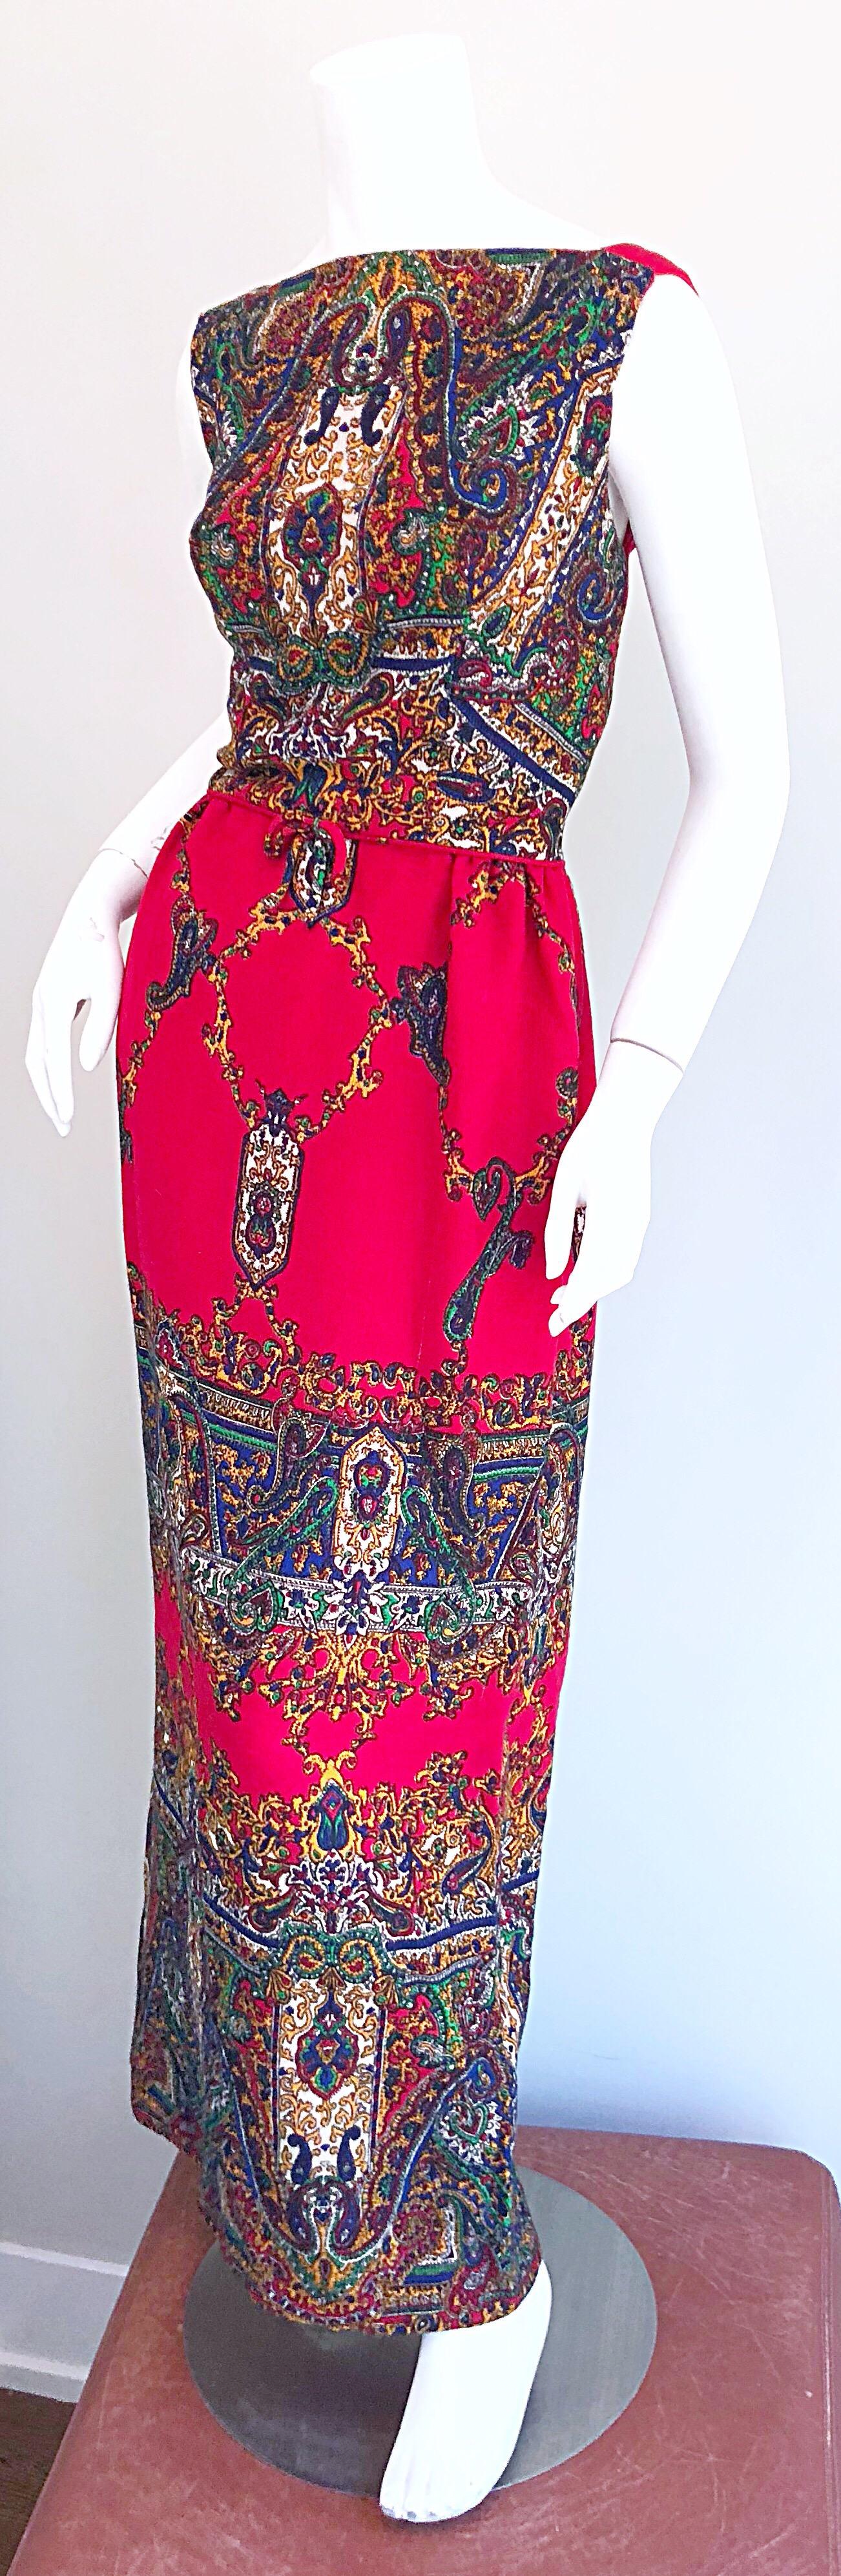 Fantastic Early 1970s Boho Chic Paisley Print Vintage Red 70s Maxi Dress In Excellent Condition For Sale In San Diego, CA